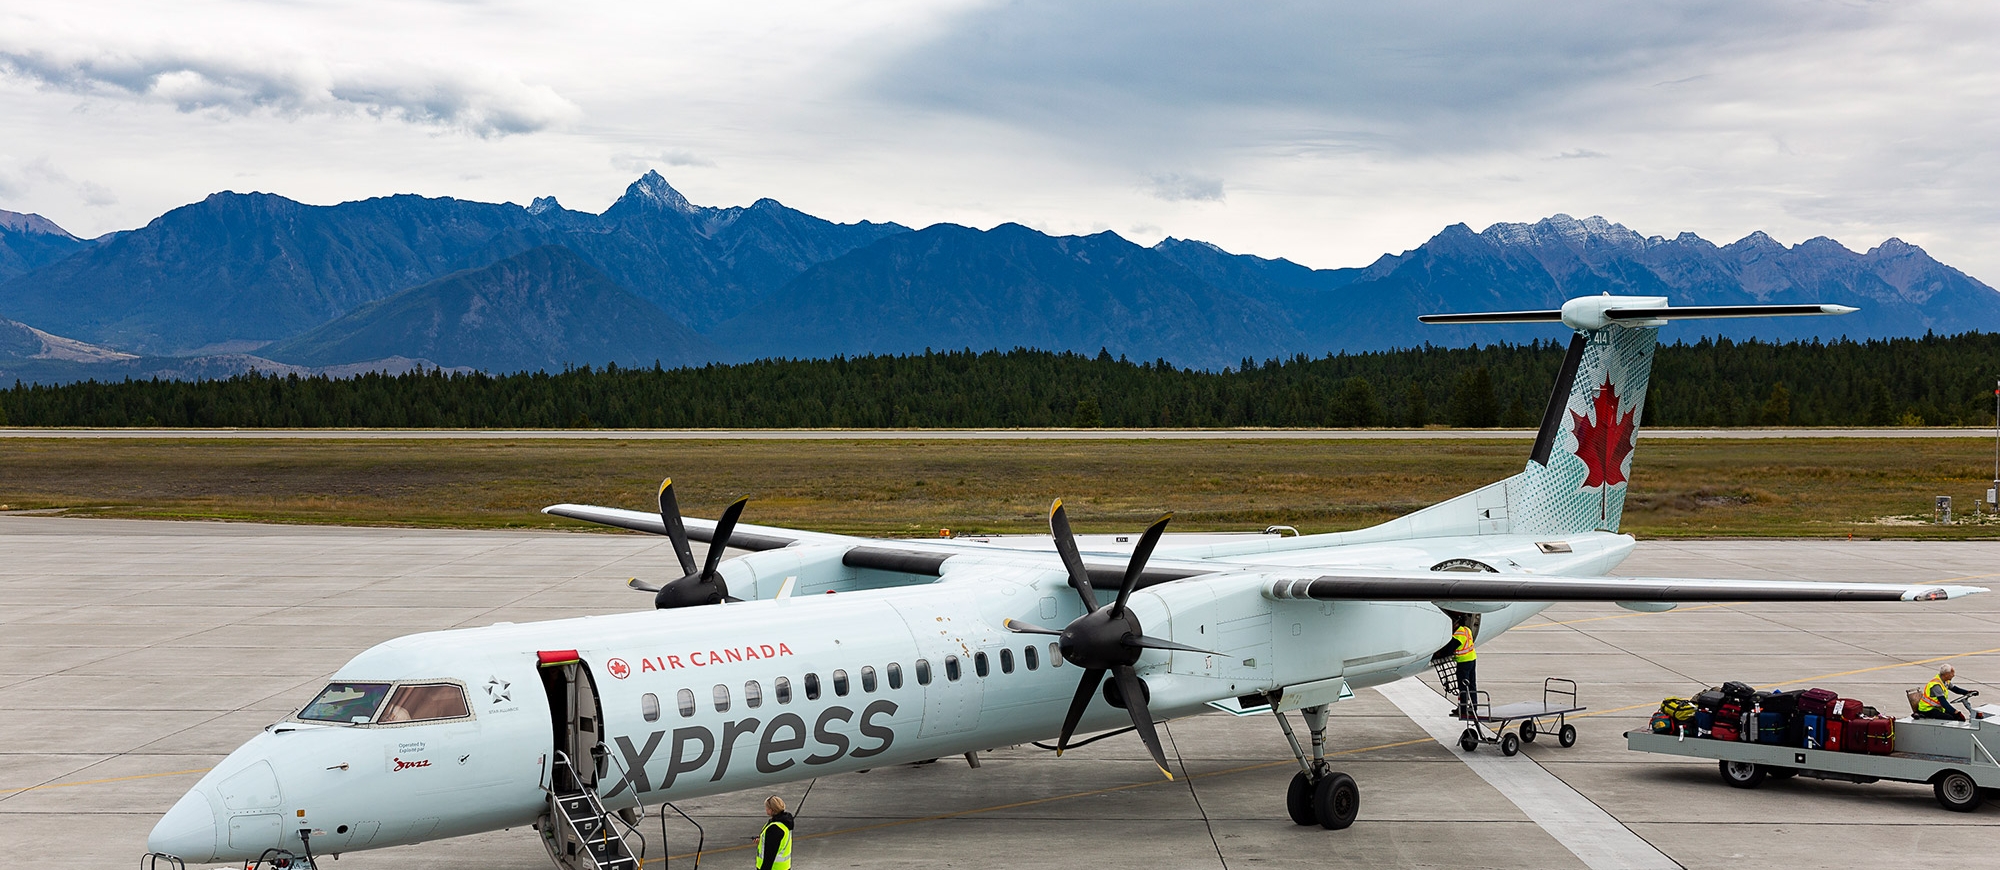 A plane with mountains in the background Canadian Rockies International Airport in Cranbrook, BC